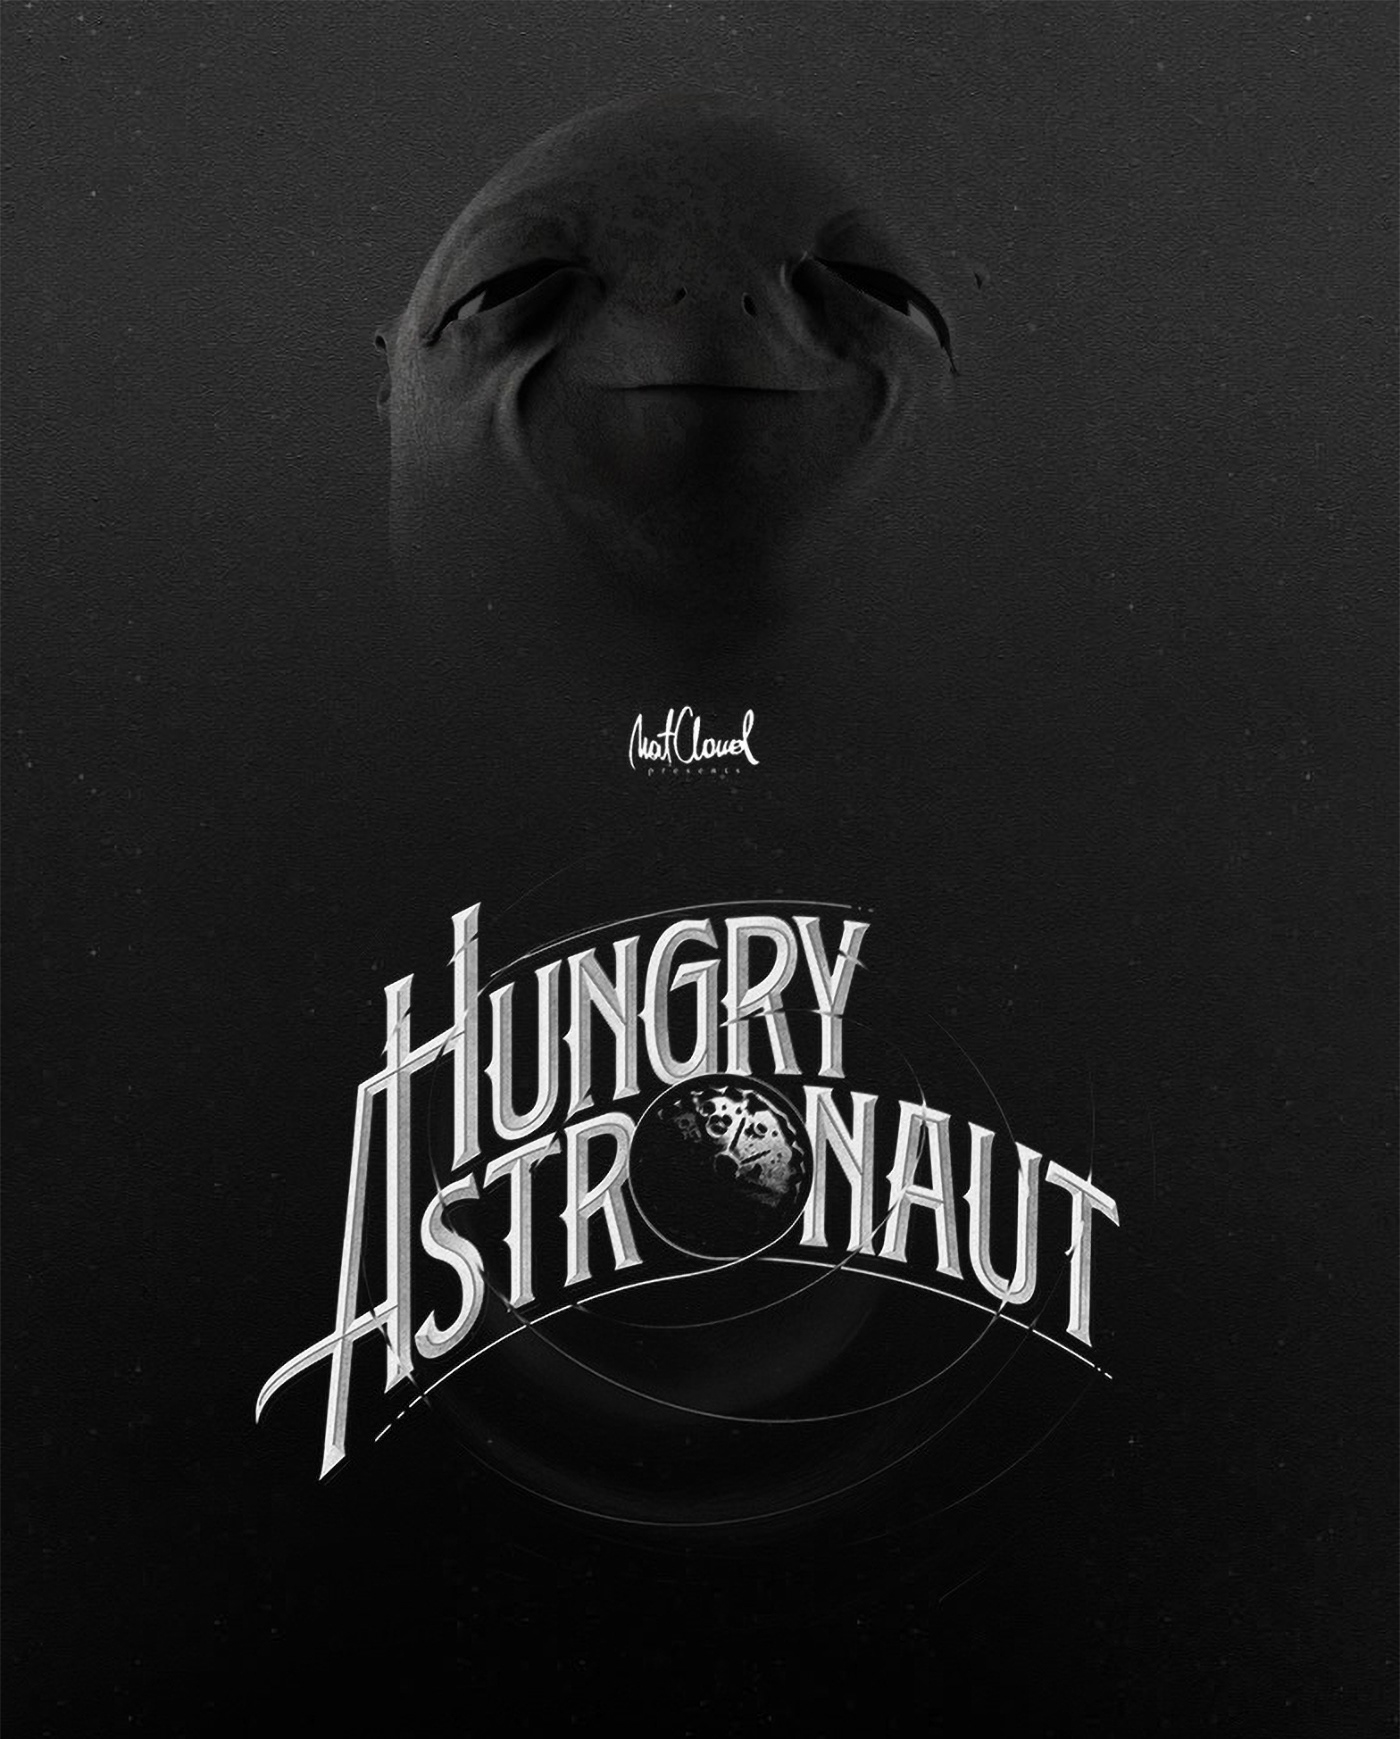 moon stars Space  cosmos nasa pie eat Food  Character cake Zbrush snack typo